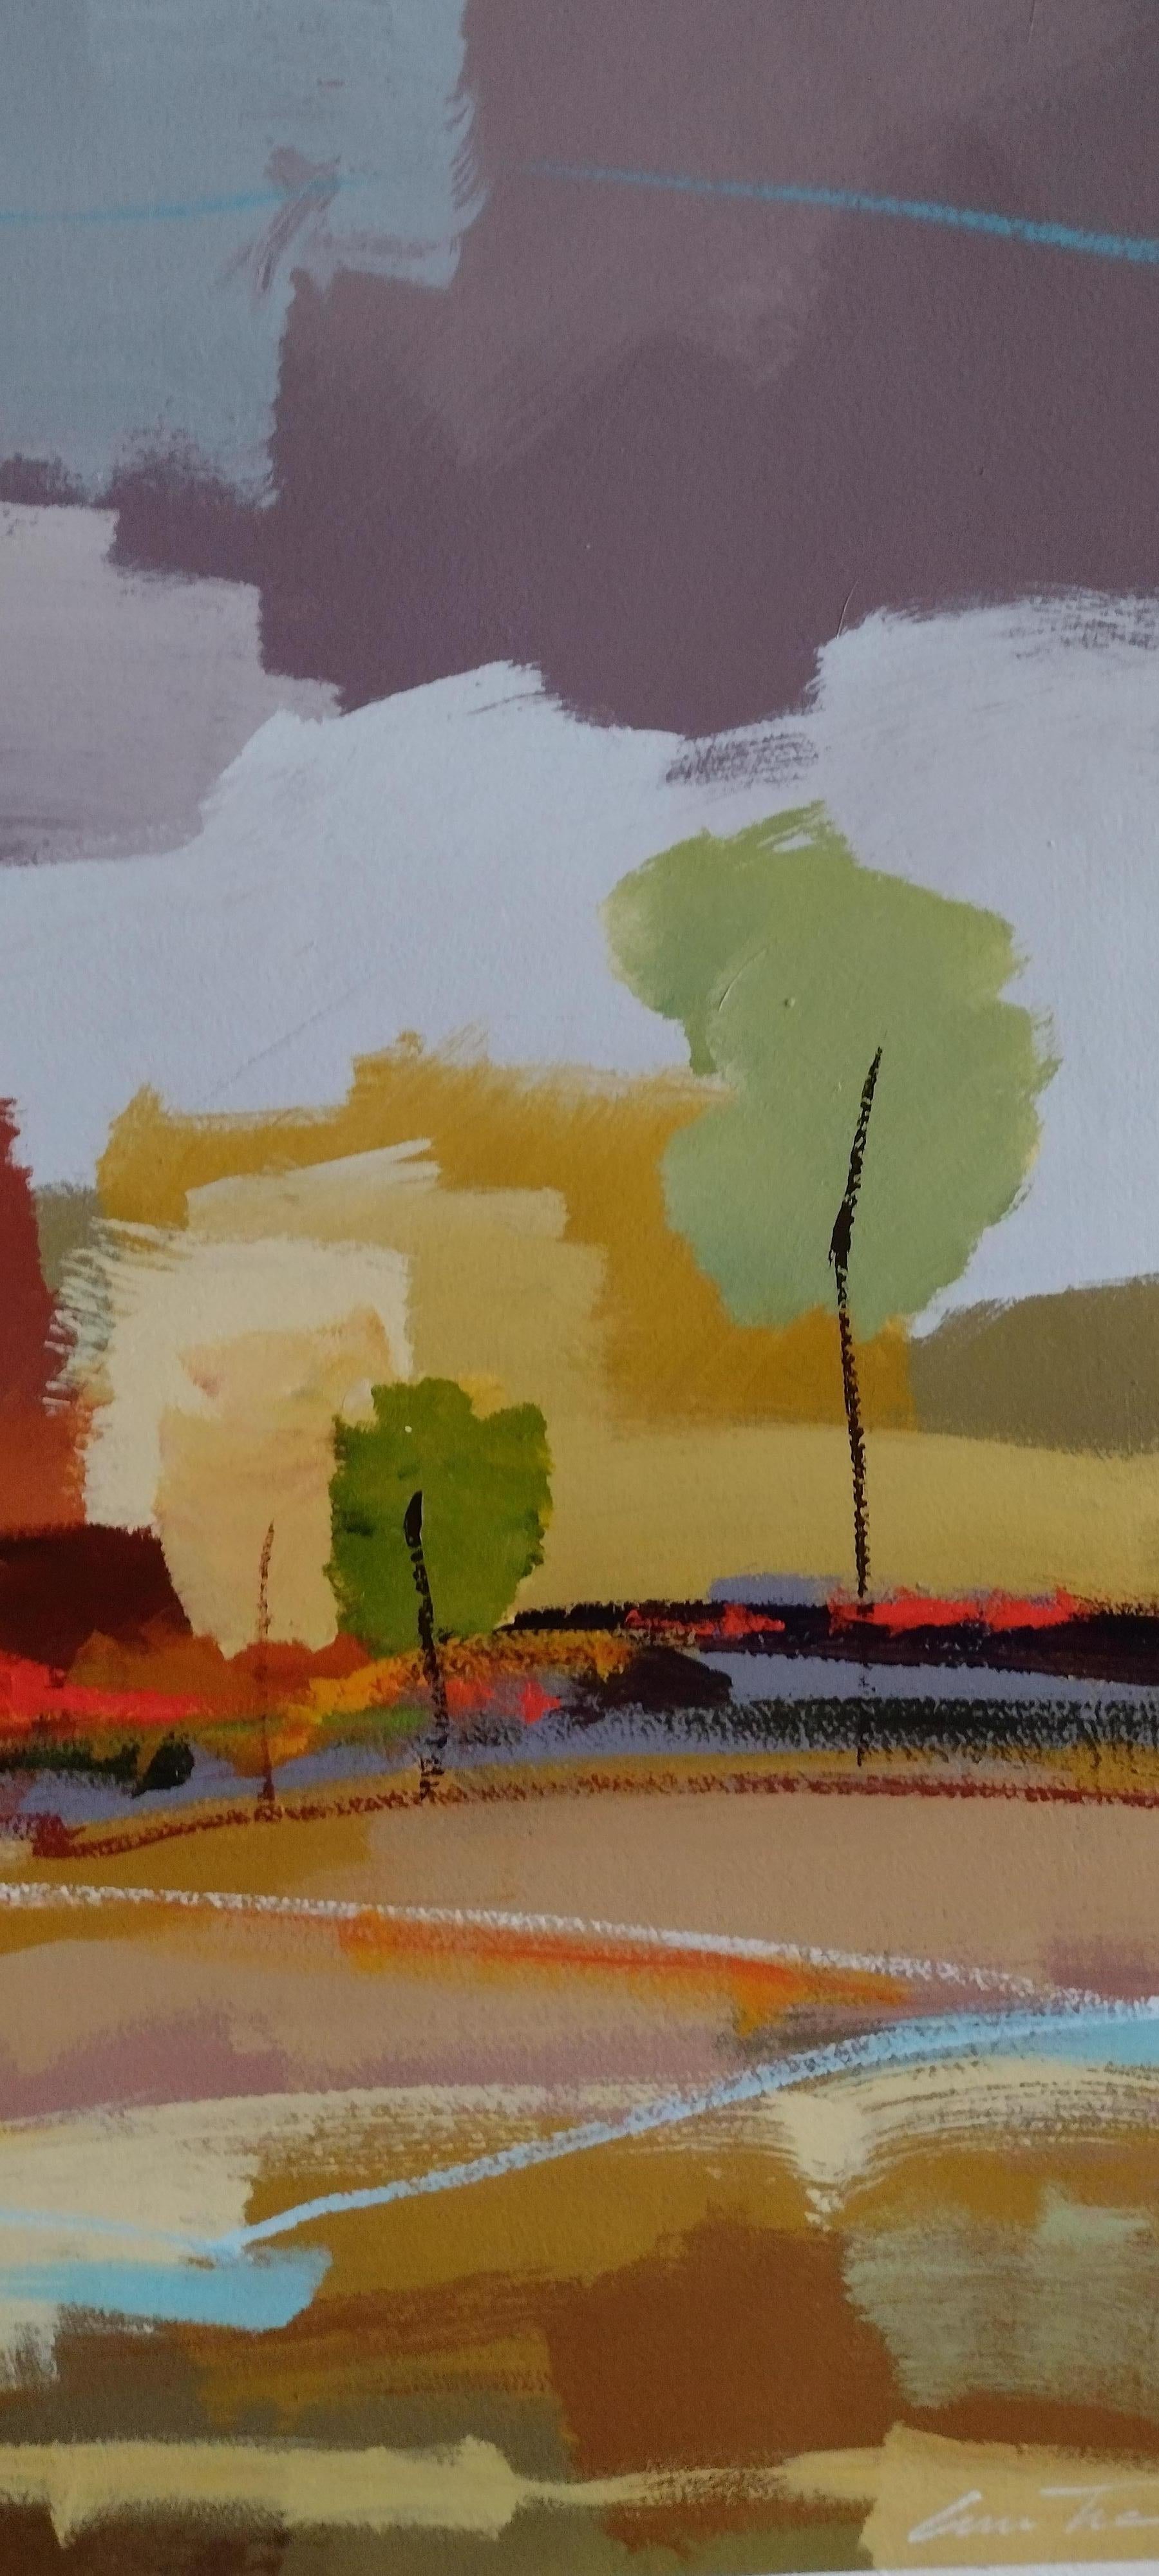 Collective Fondness II - Original Acrylic Landscape on Paper - Painting by Lun Tse 